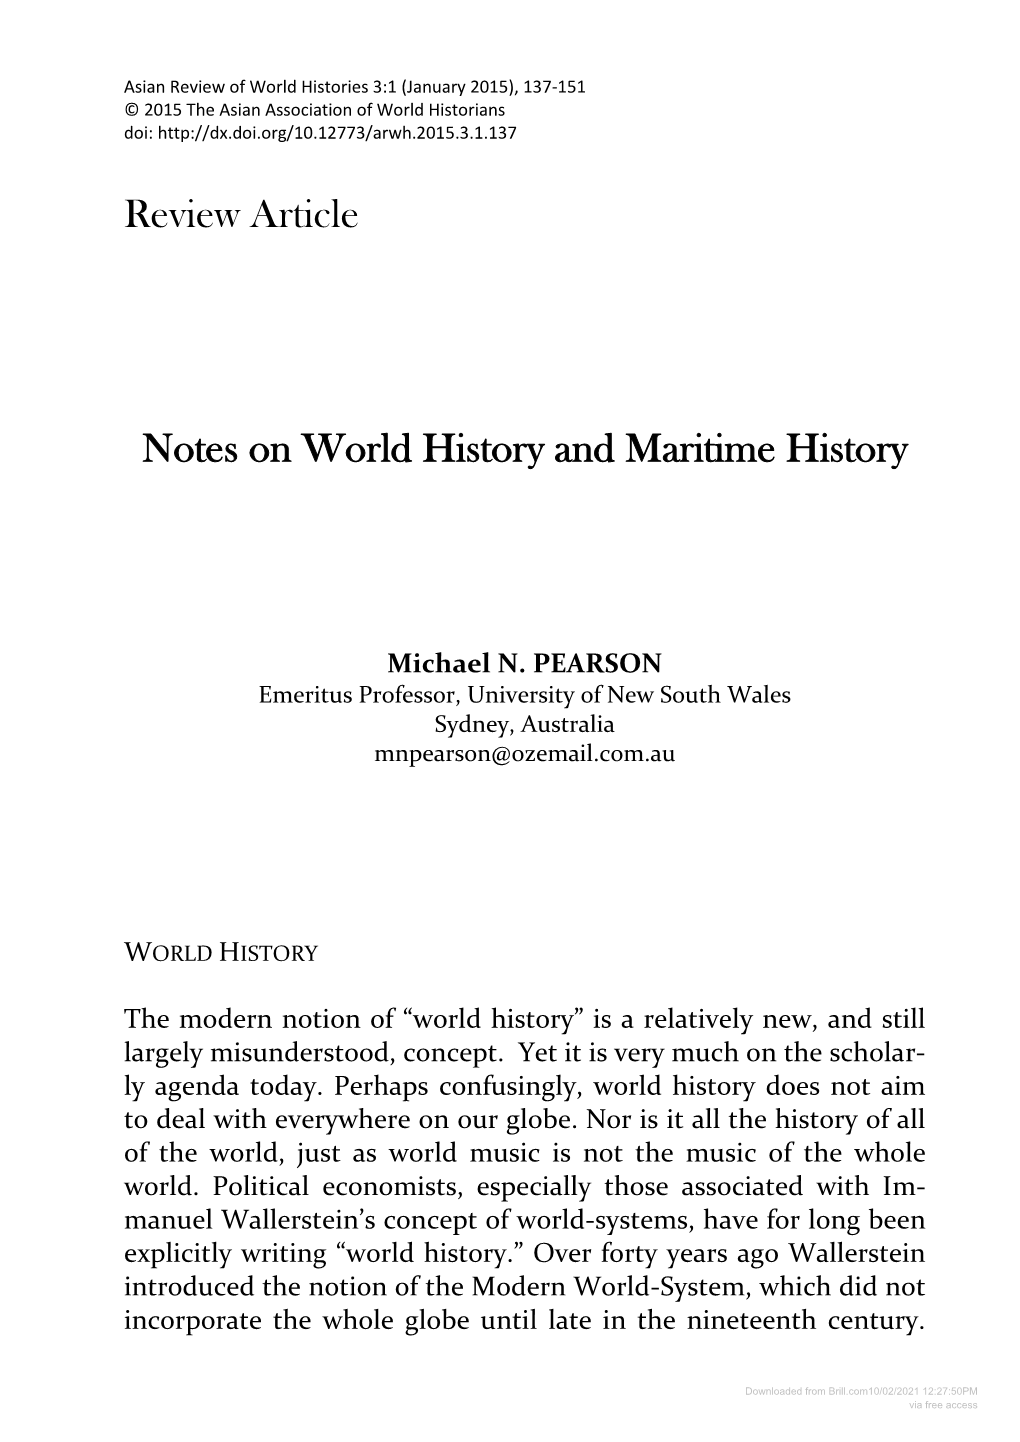 Review Article Notes on World History and Maritime History